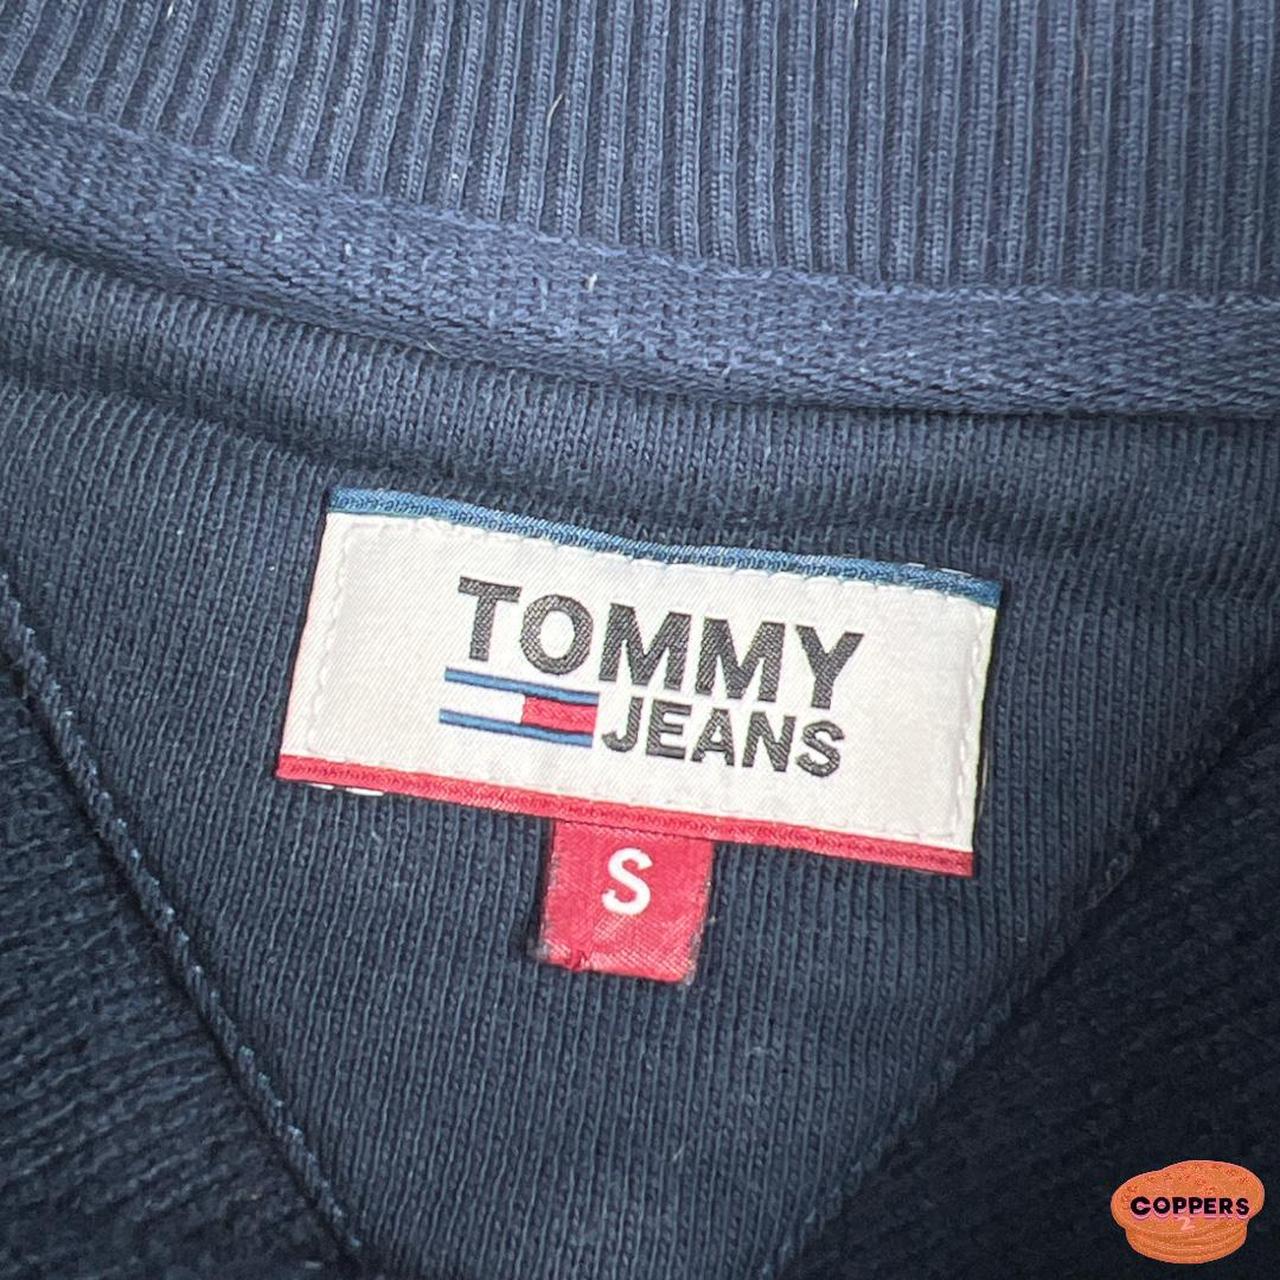 Tommy Jeans Flag sweater | navy colourway | large... - Depop